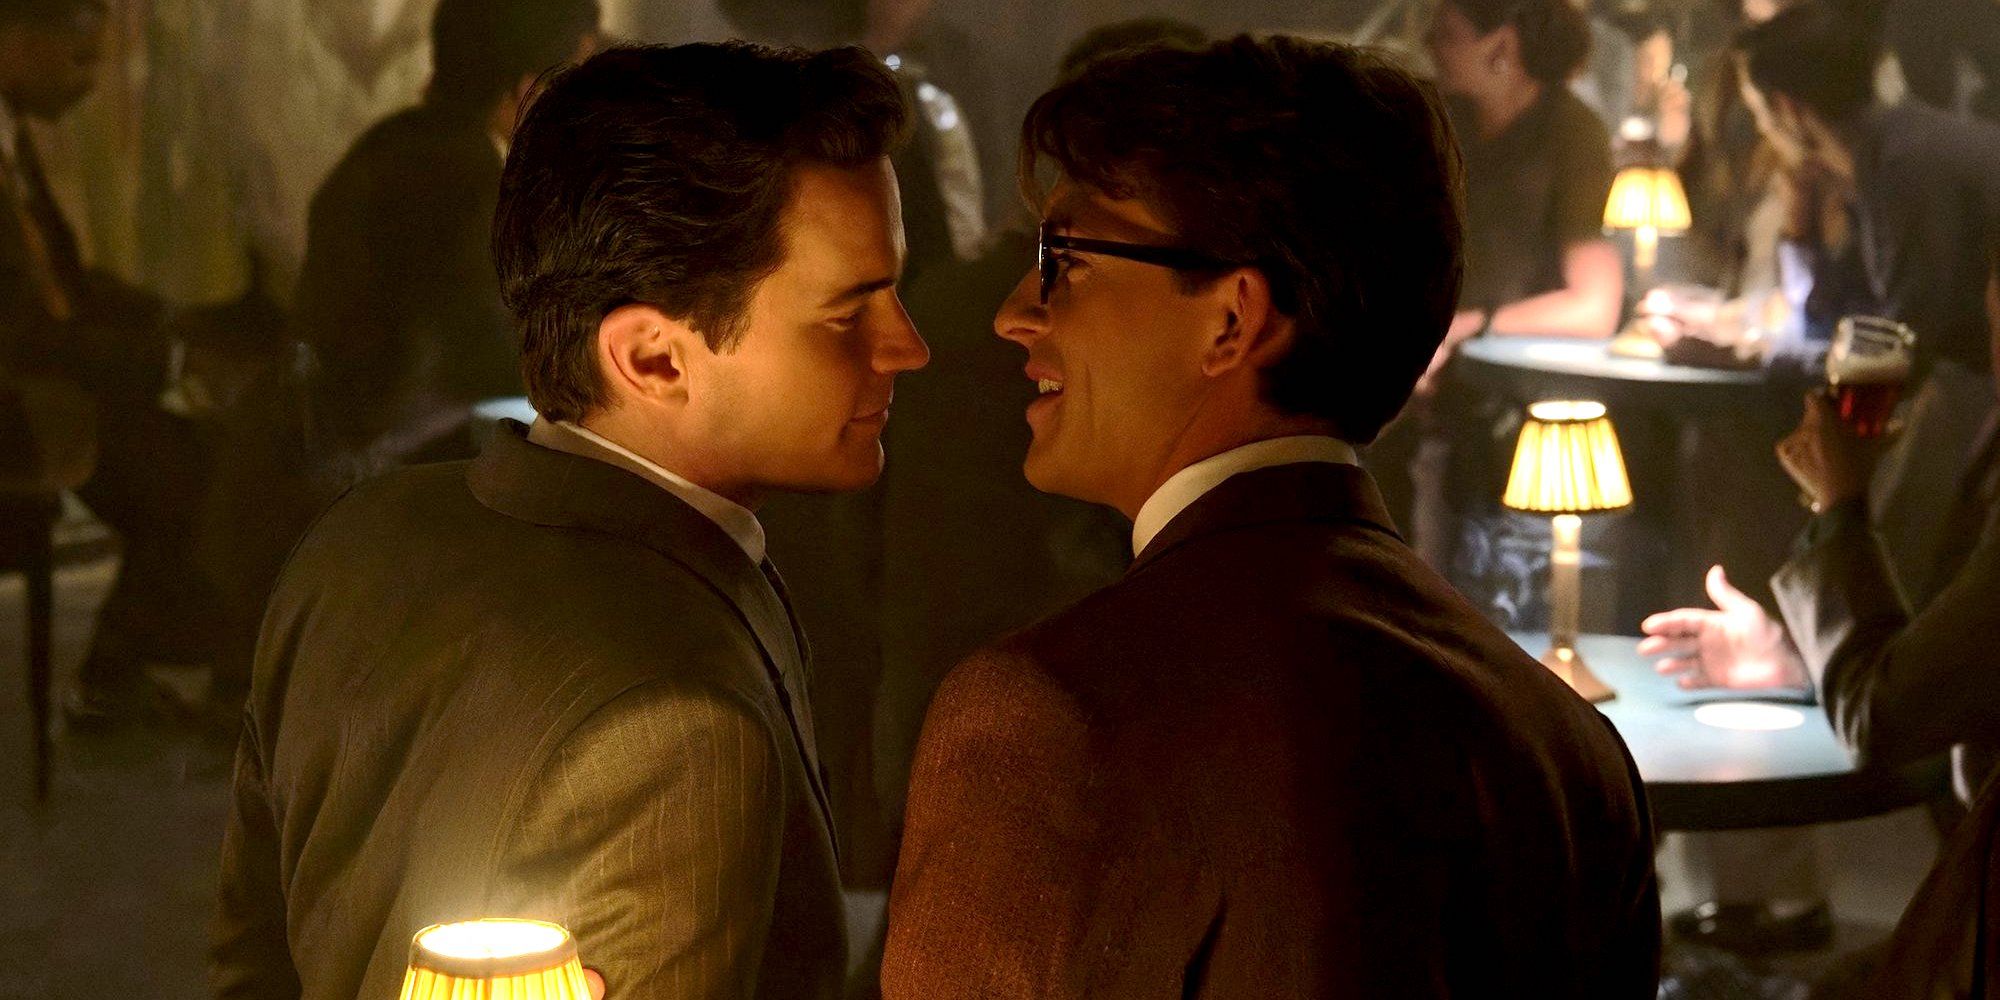 Jonathan Bailey and Matt Bomer About to Kiss at a table in Fellow Travelers